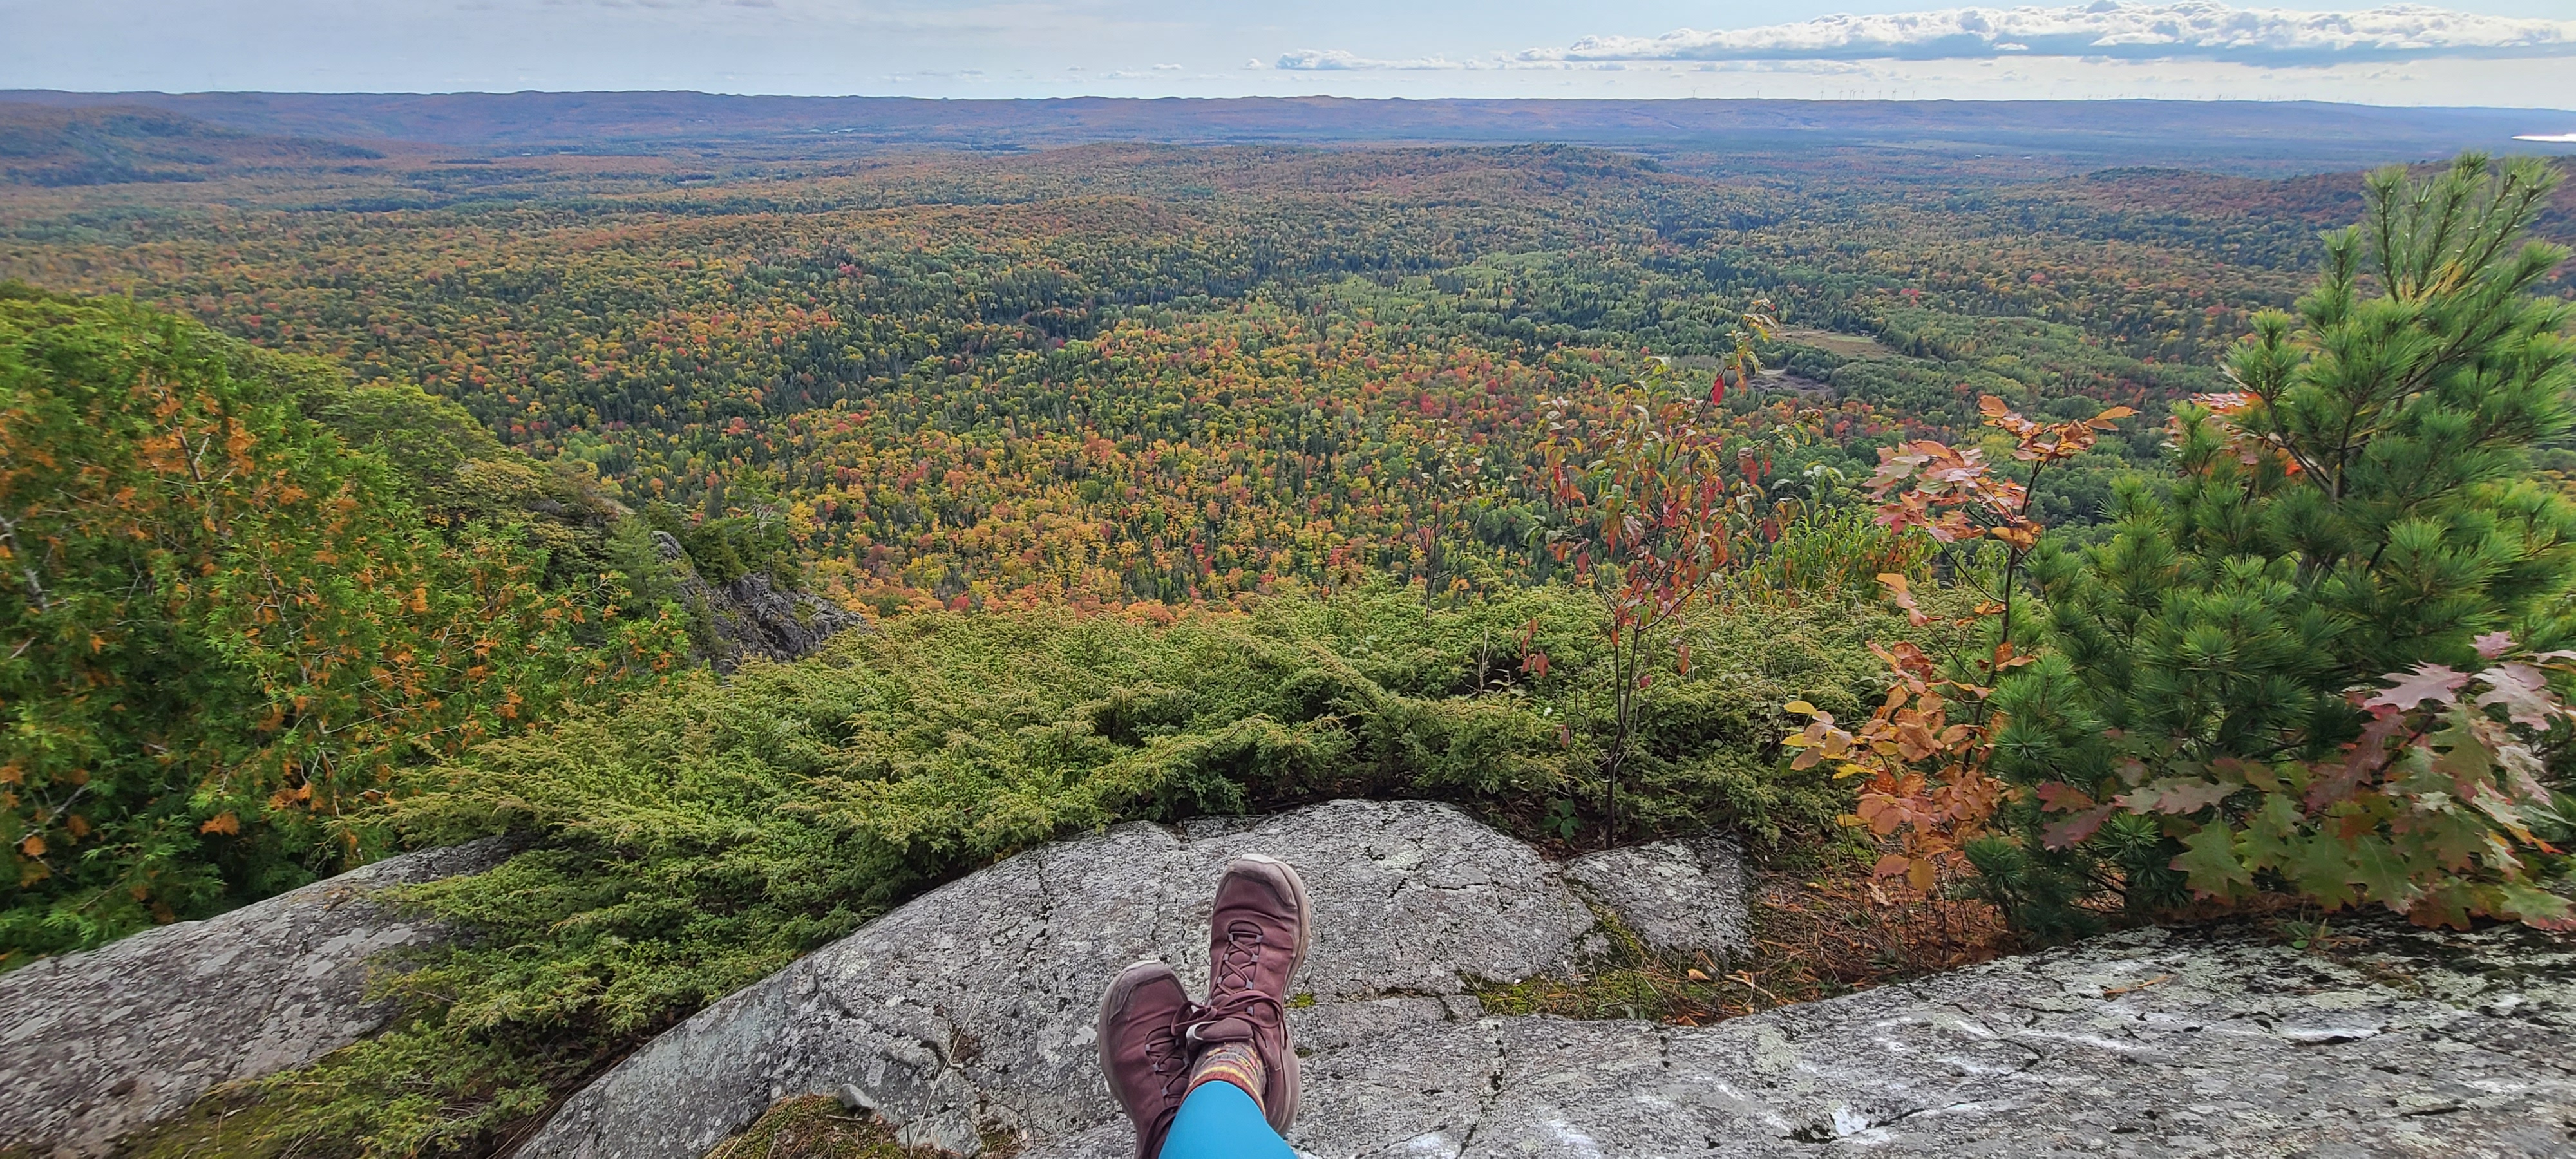 the edge of a rocky cliff, covered in green foliage, overlooking a broad green forested valley. The photographer's feet can be seen at the bottom edge of the image, as they are sitting on the cliff.